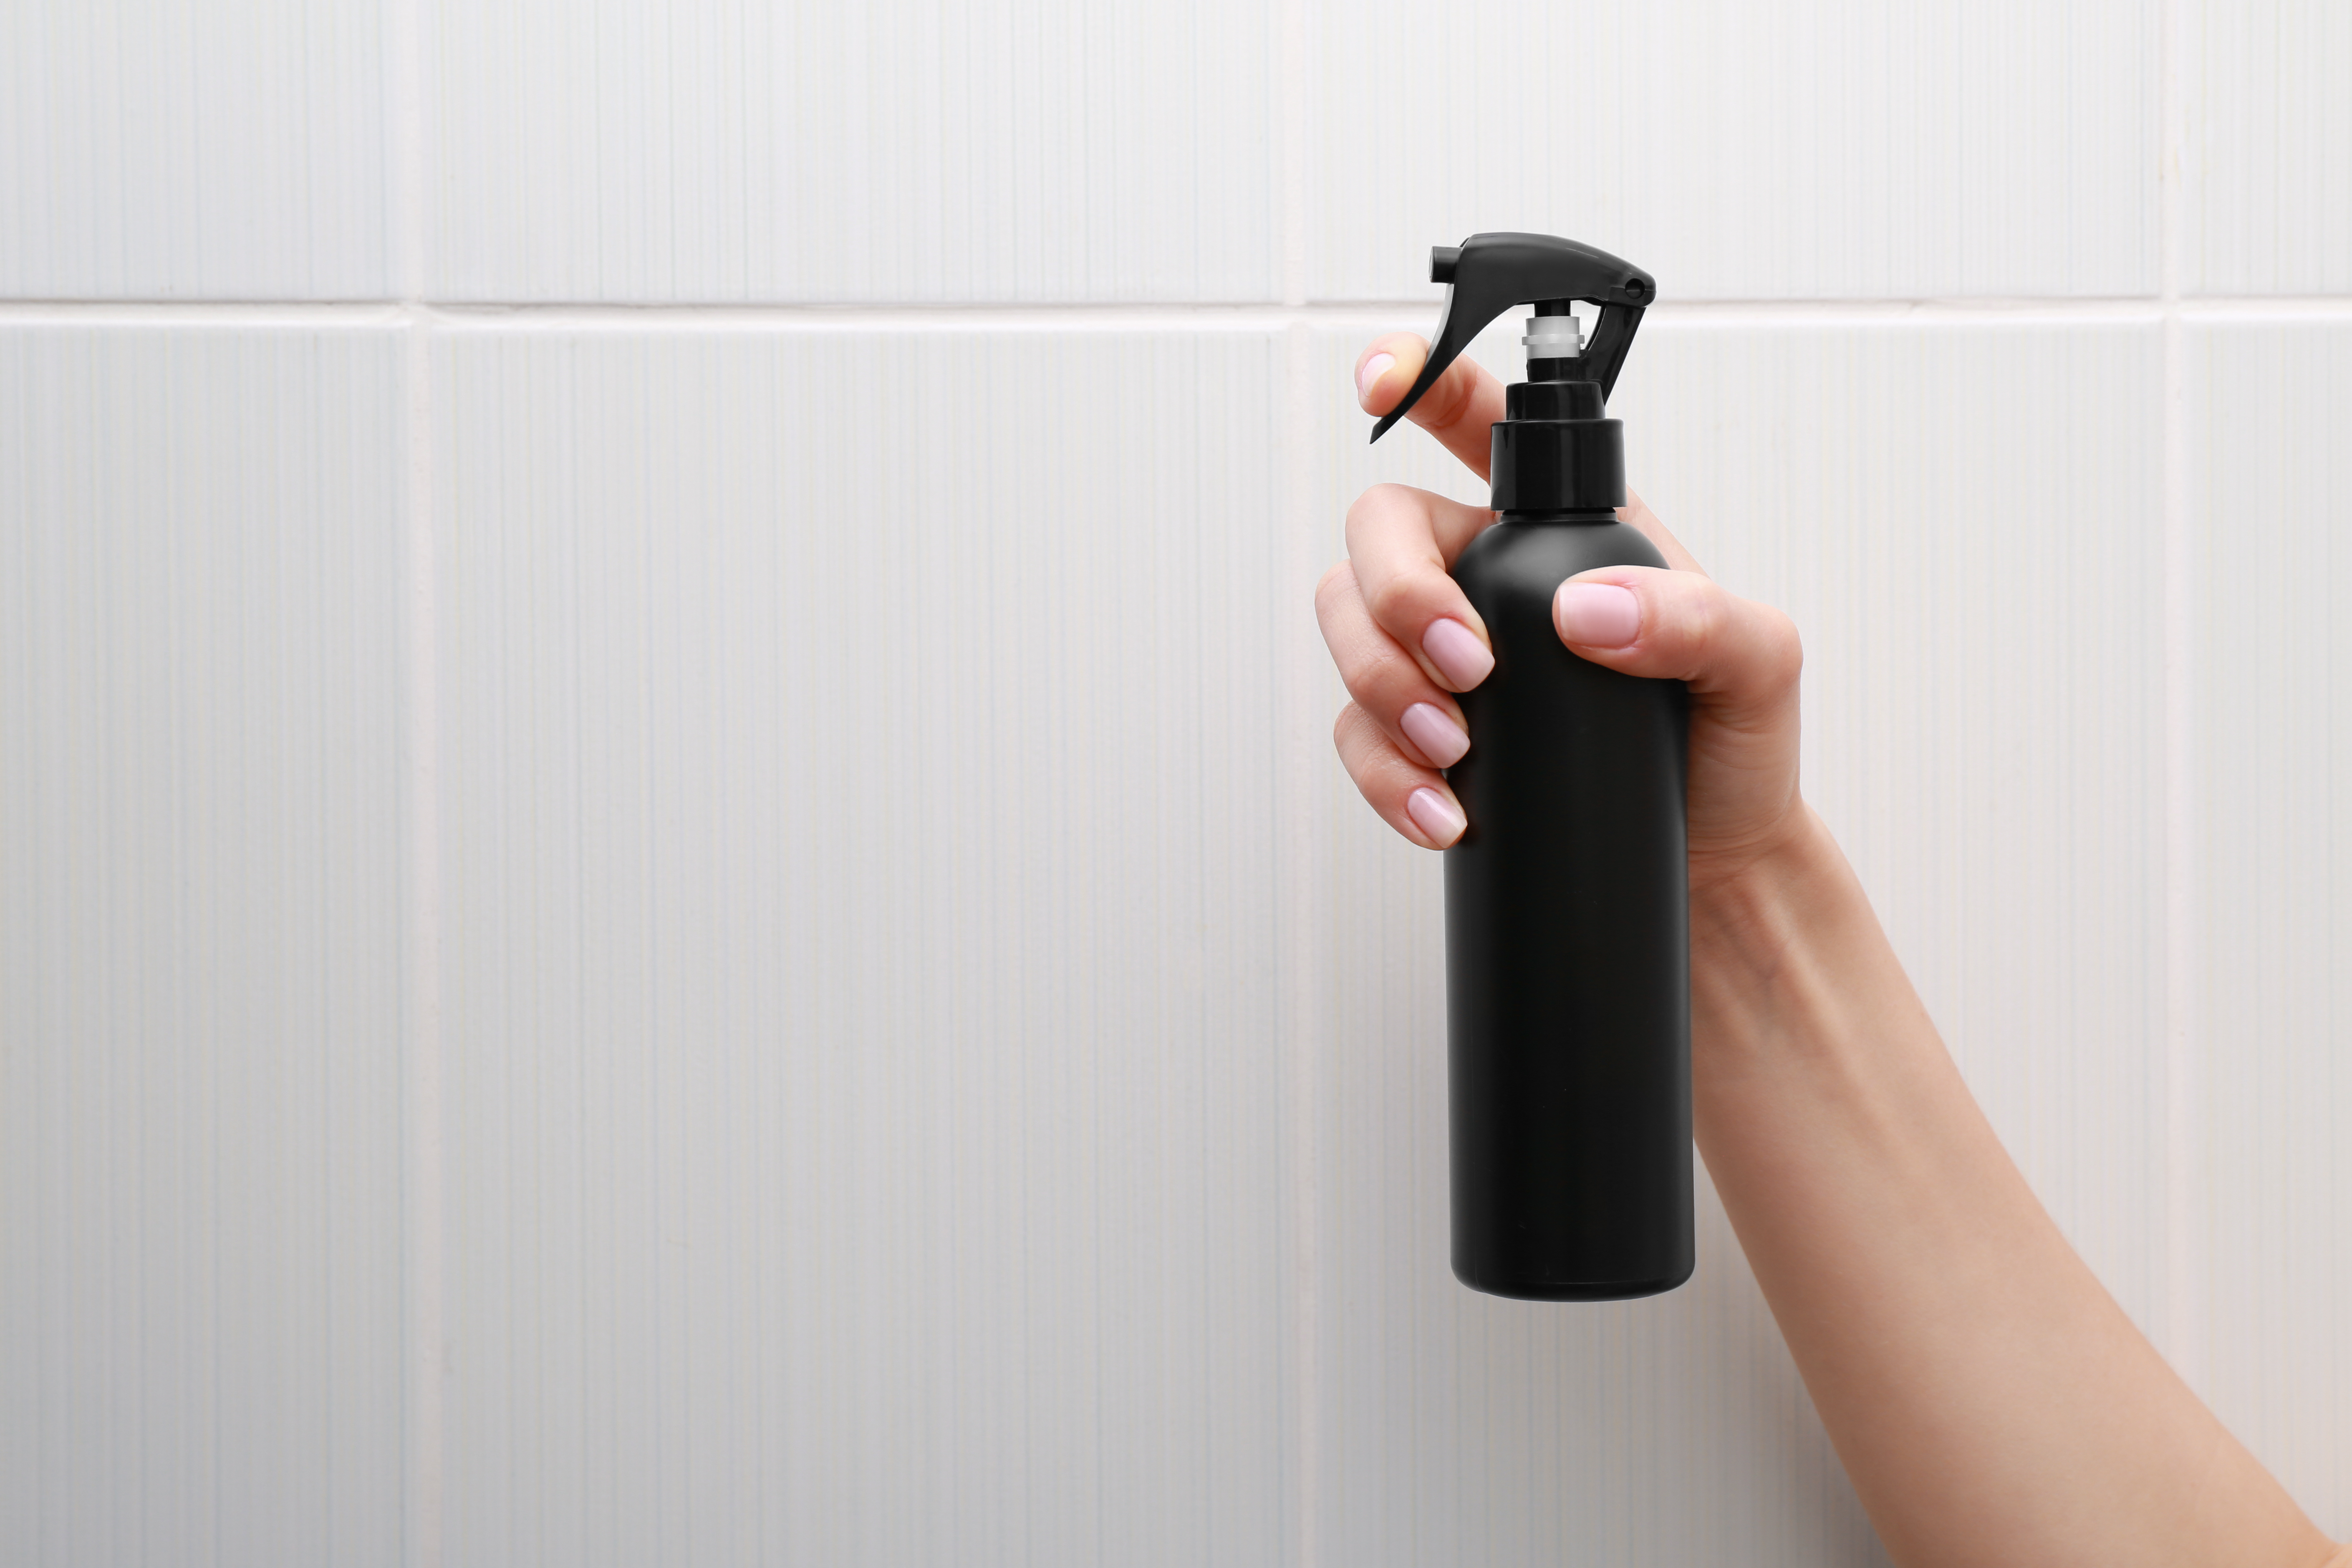 Spray your matte porcelain tiles with a vinegar and water solution for deep cleaning | Source: Shutterstock